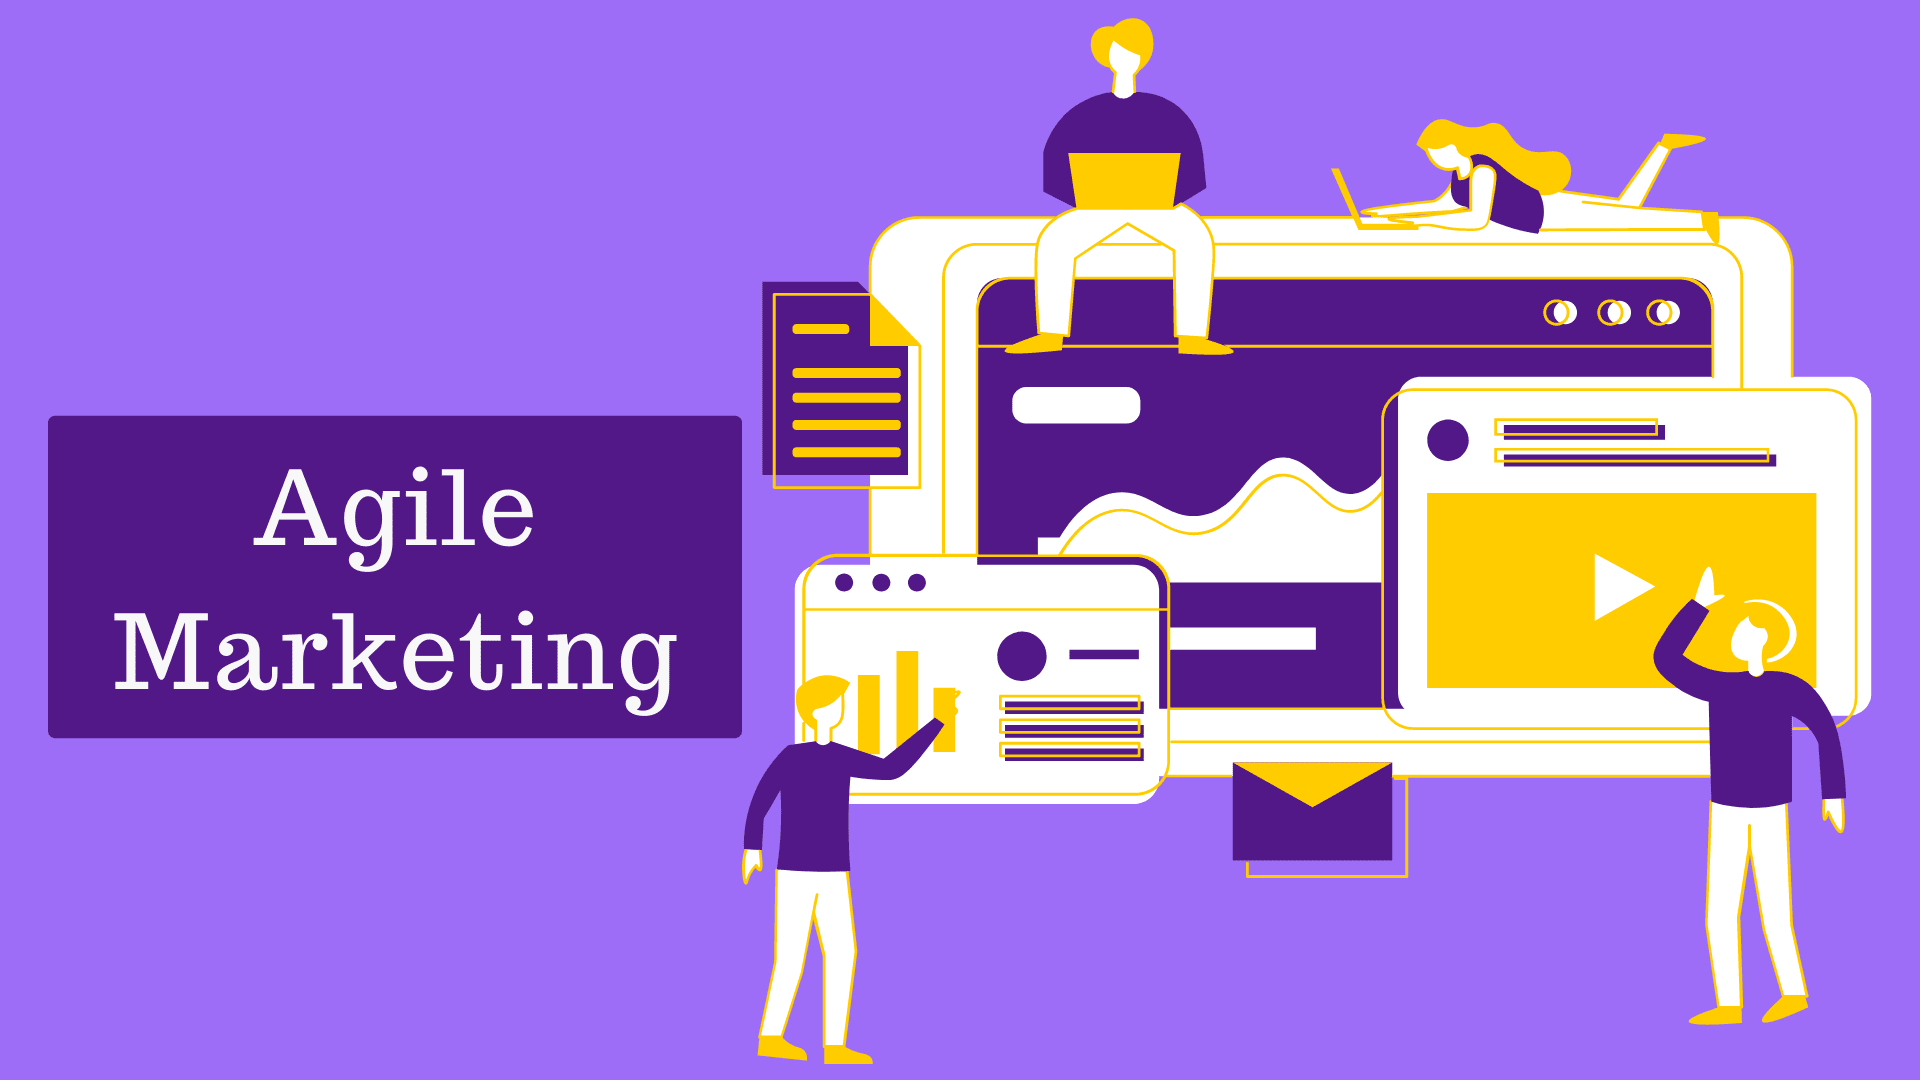 What is Agile Marketing